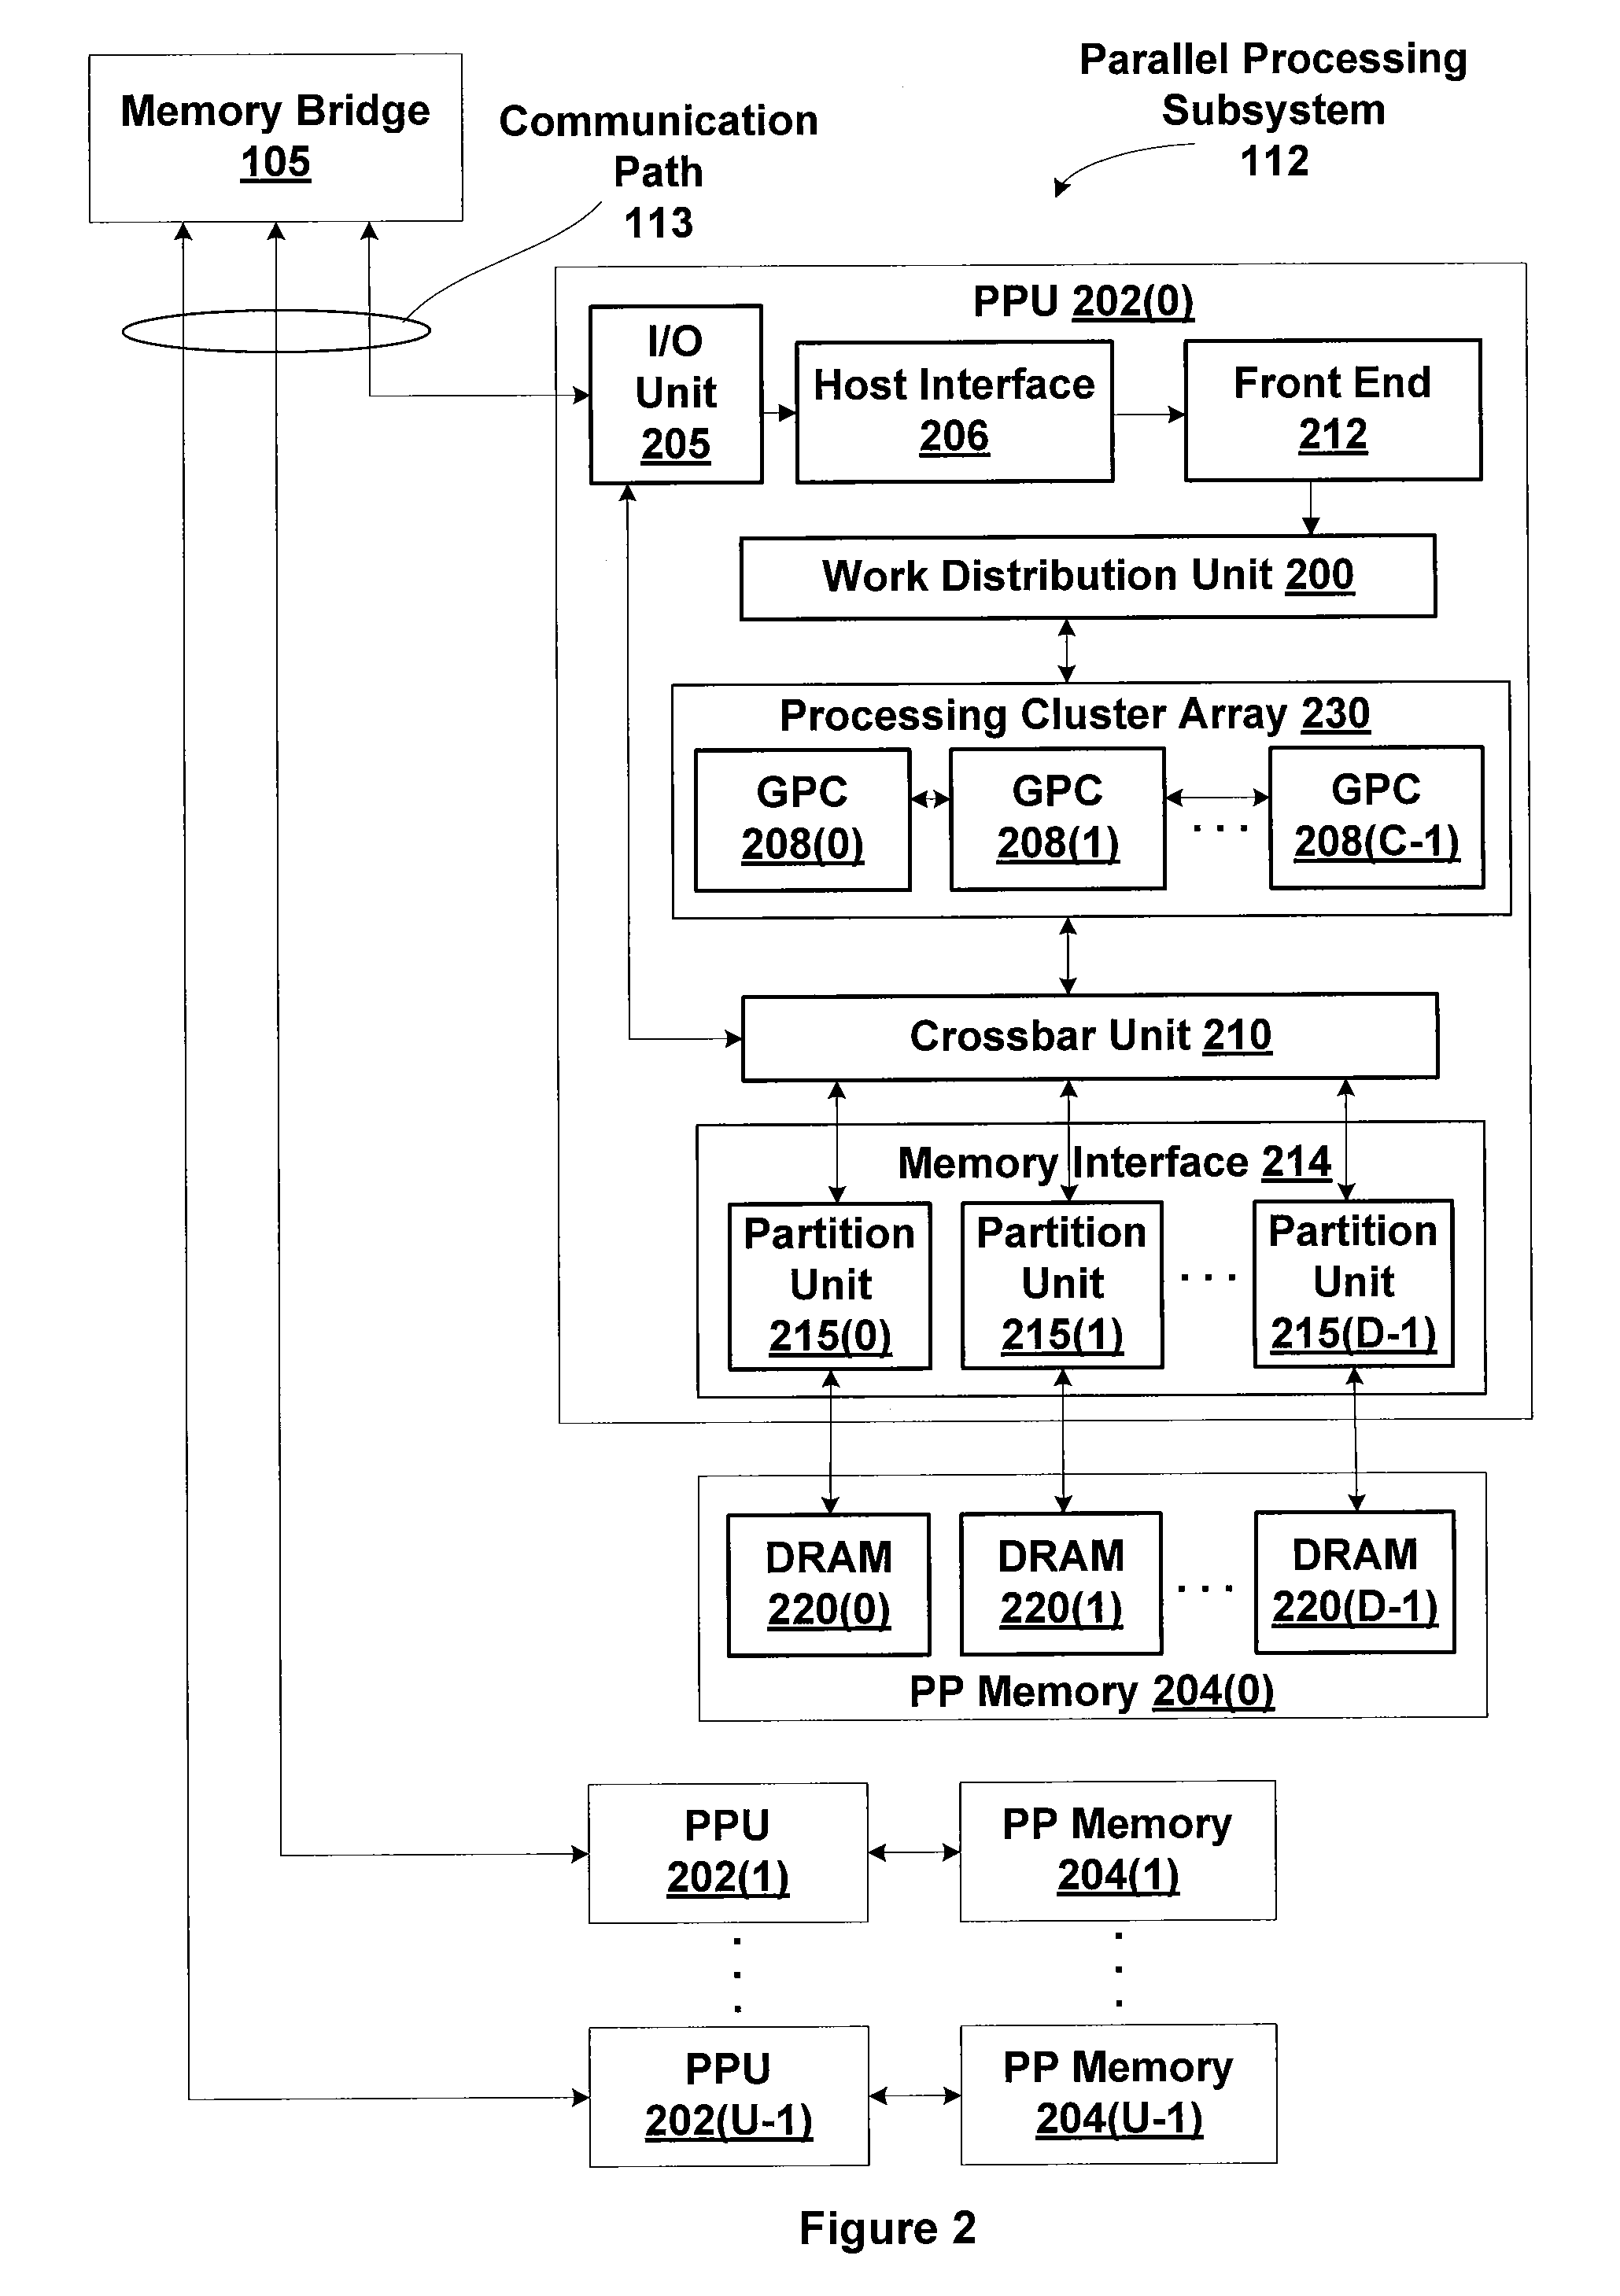 Coalescing memory barrier operations across multiple parallel threads